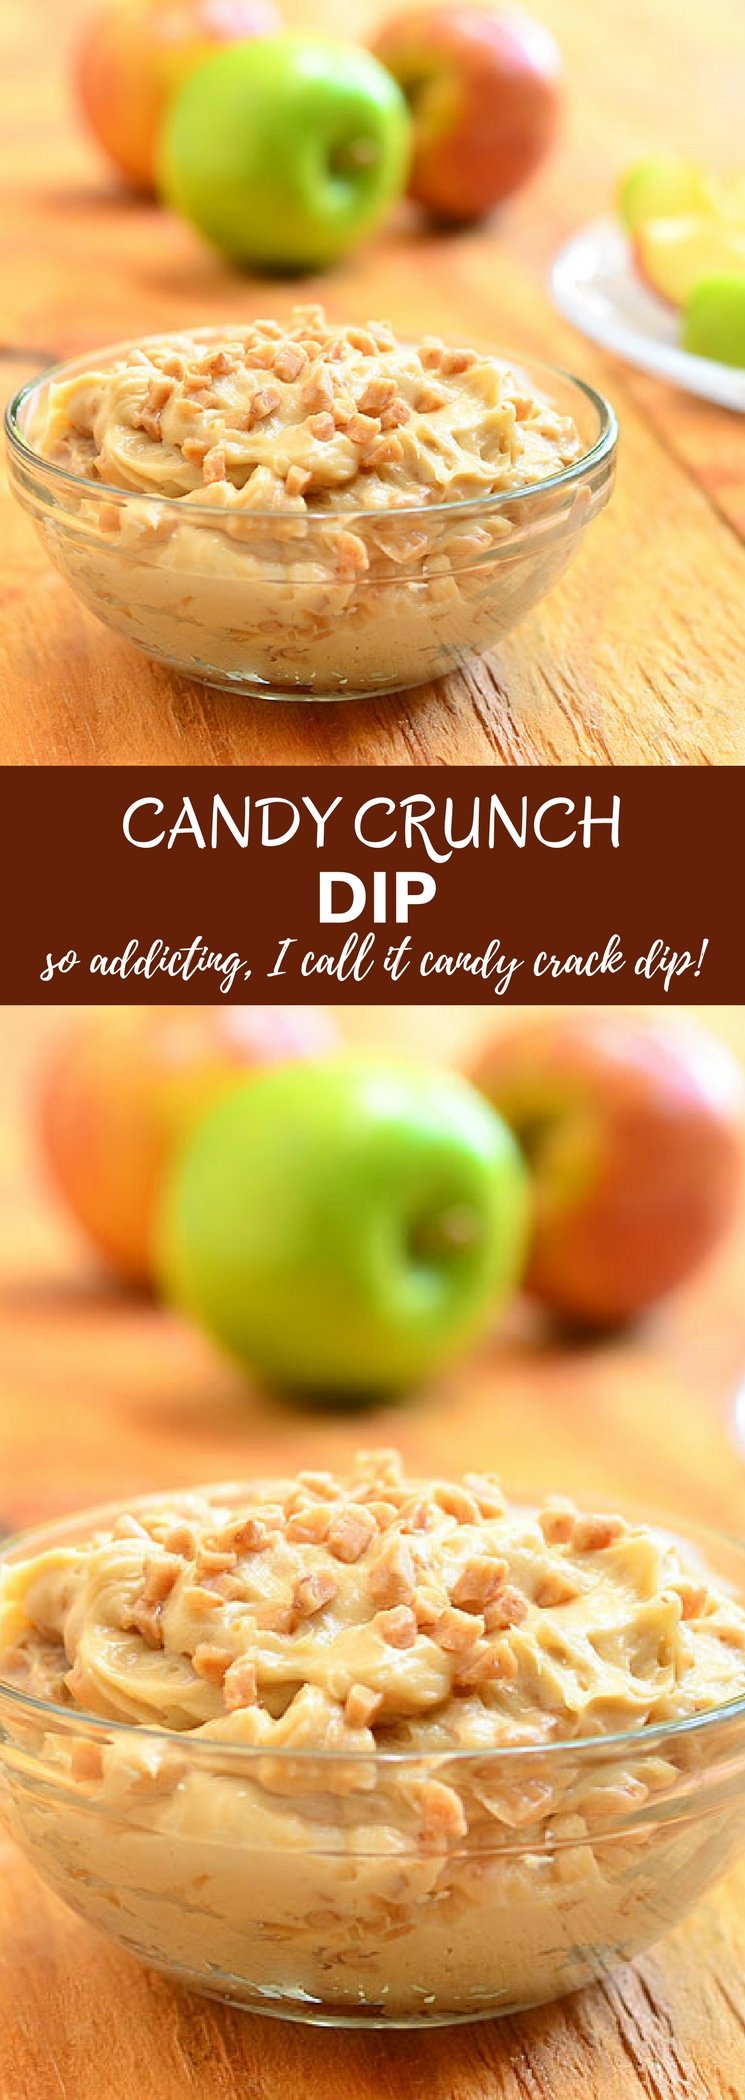 Candy Crunch dip loaded with toffee bits is a delicious dessert dip you'd love digging into with apples, graham crackers, and vanilla wafers! So addicting, you might as well call it candy CRACK dip!